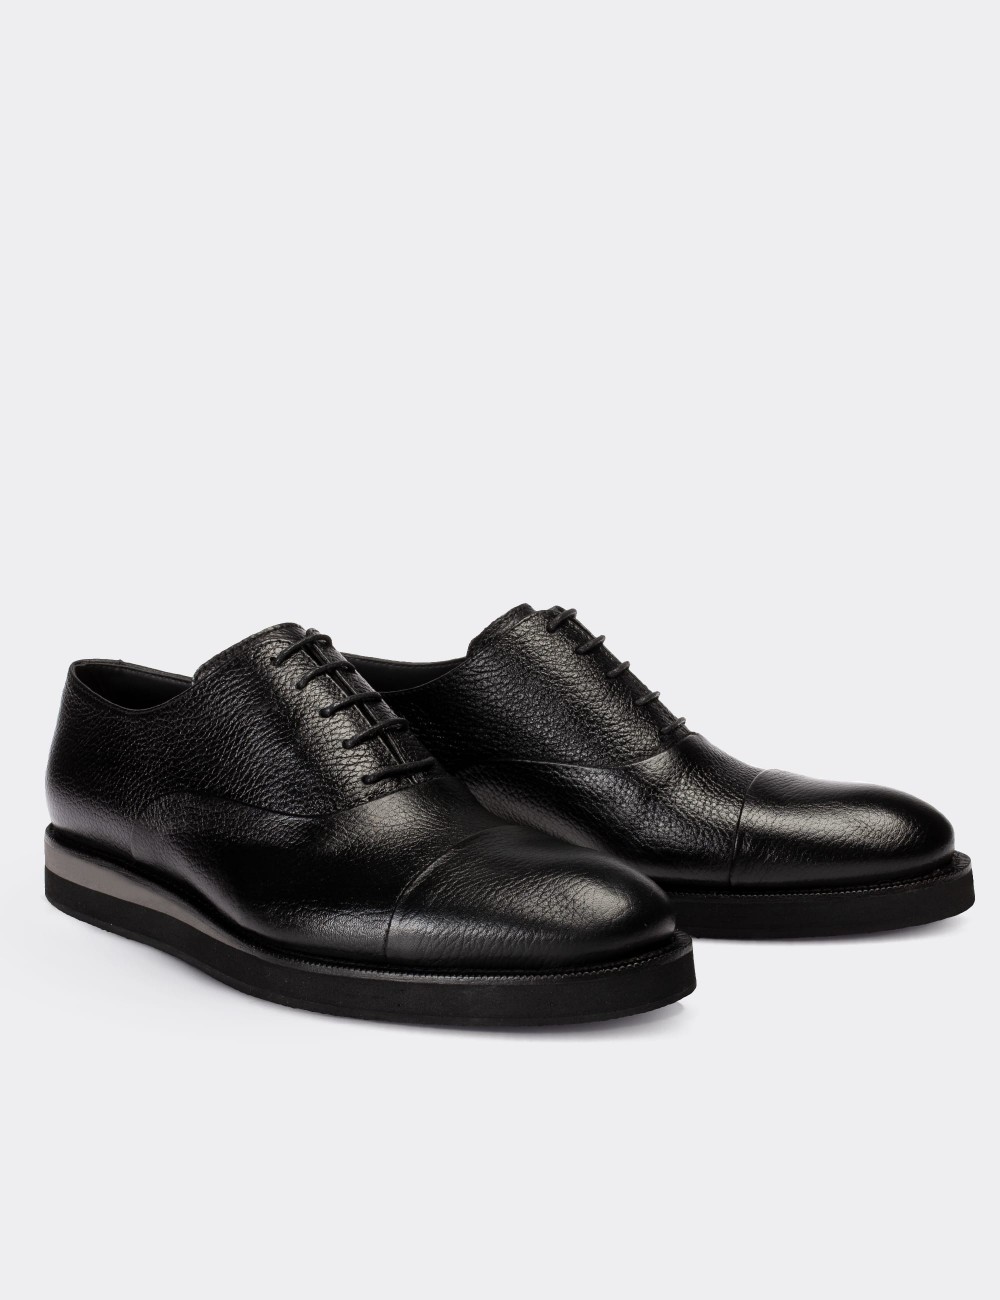 Black  Leather Lace-up Shoes - 01026MSYHE11